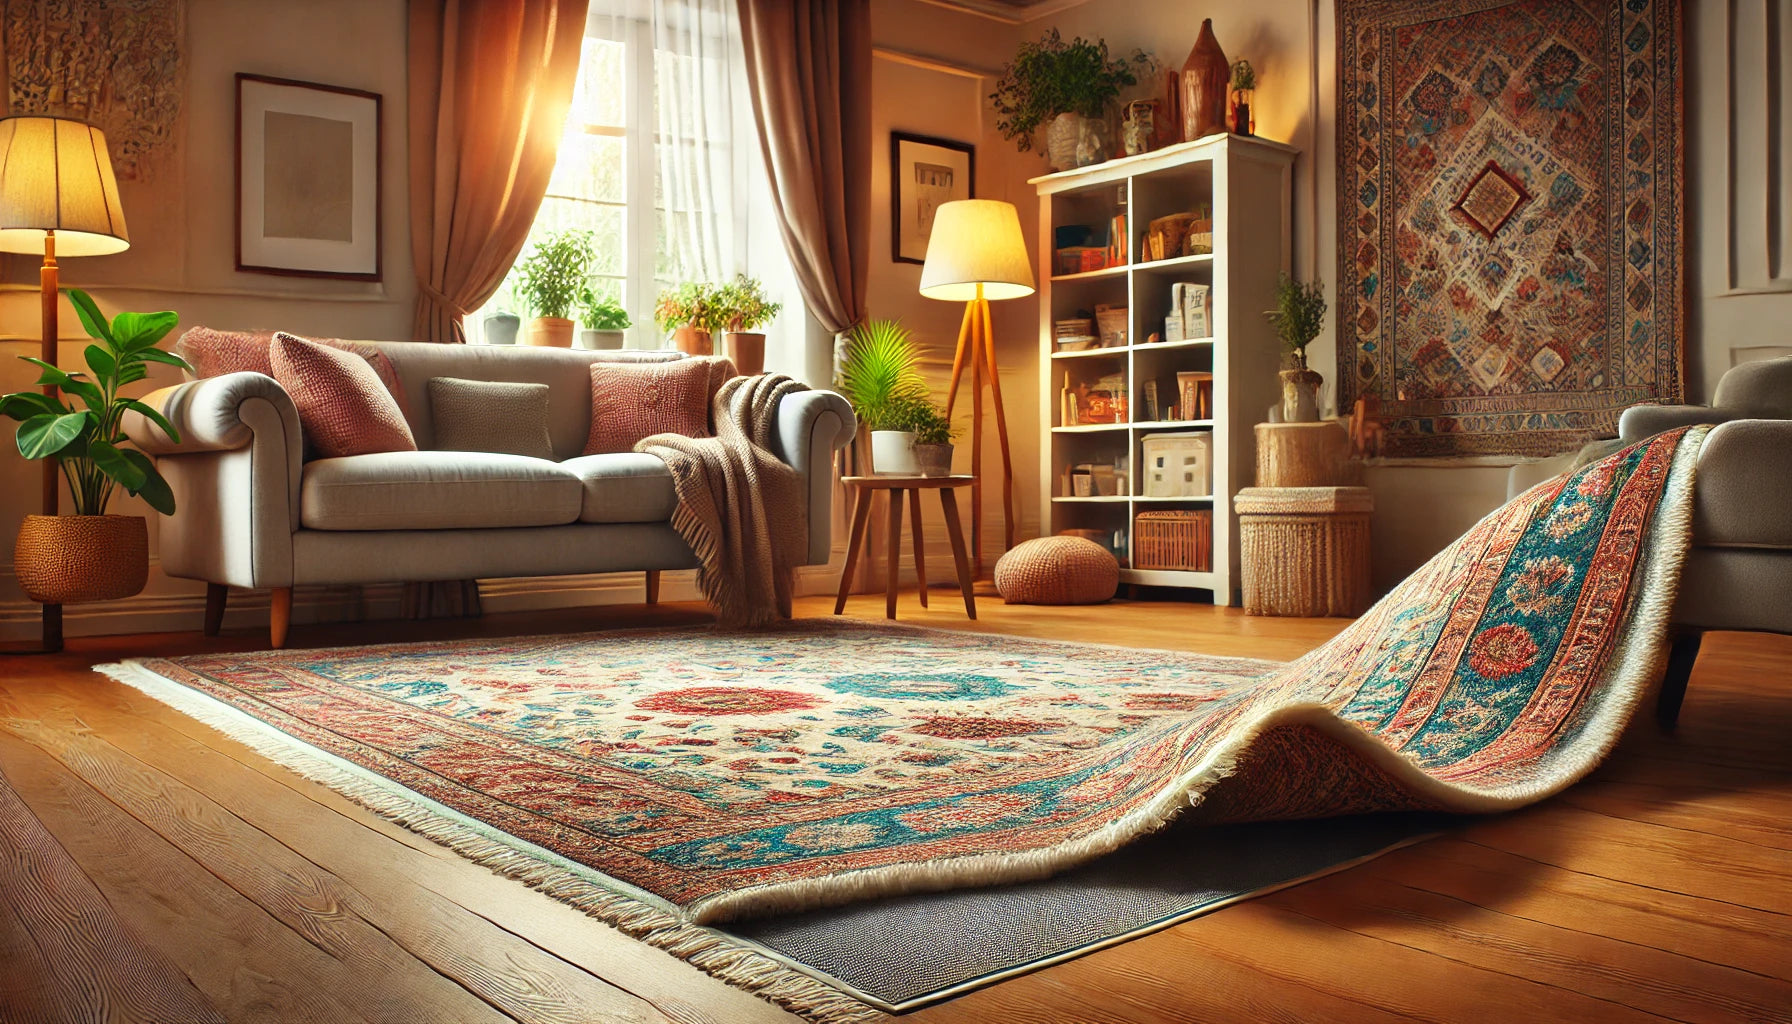 Top Benefits of Using a Rug Pad Under Your Rugs